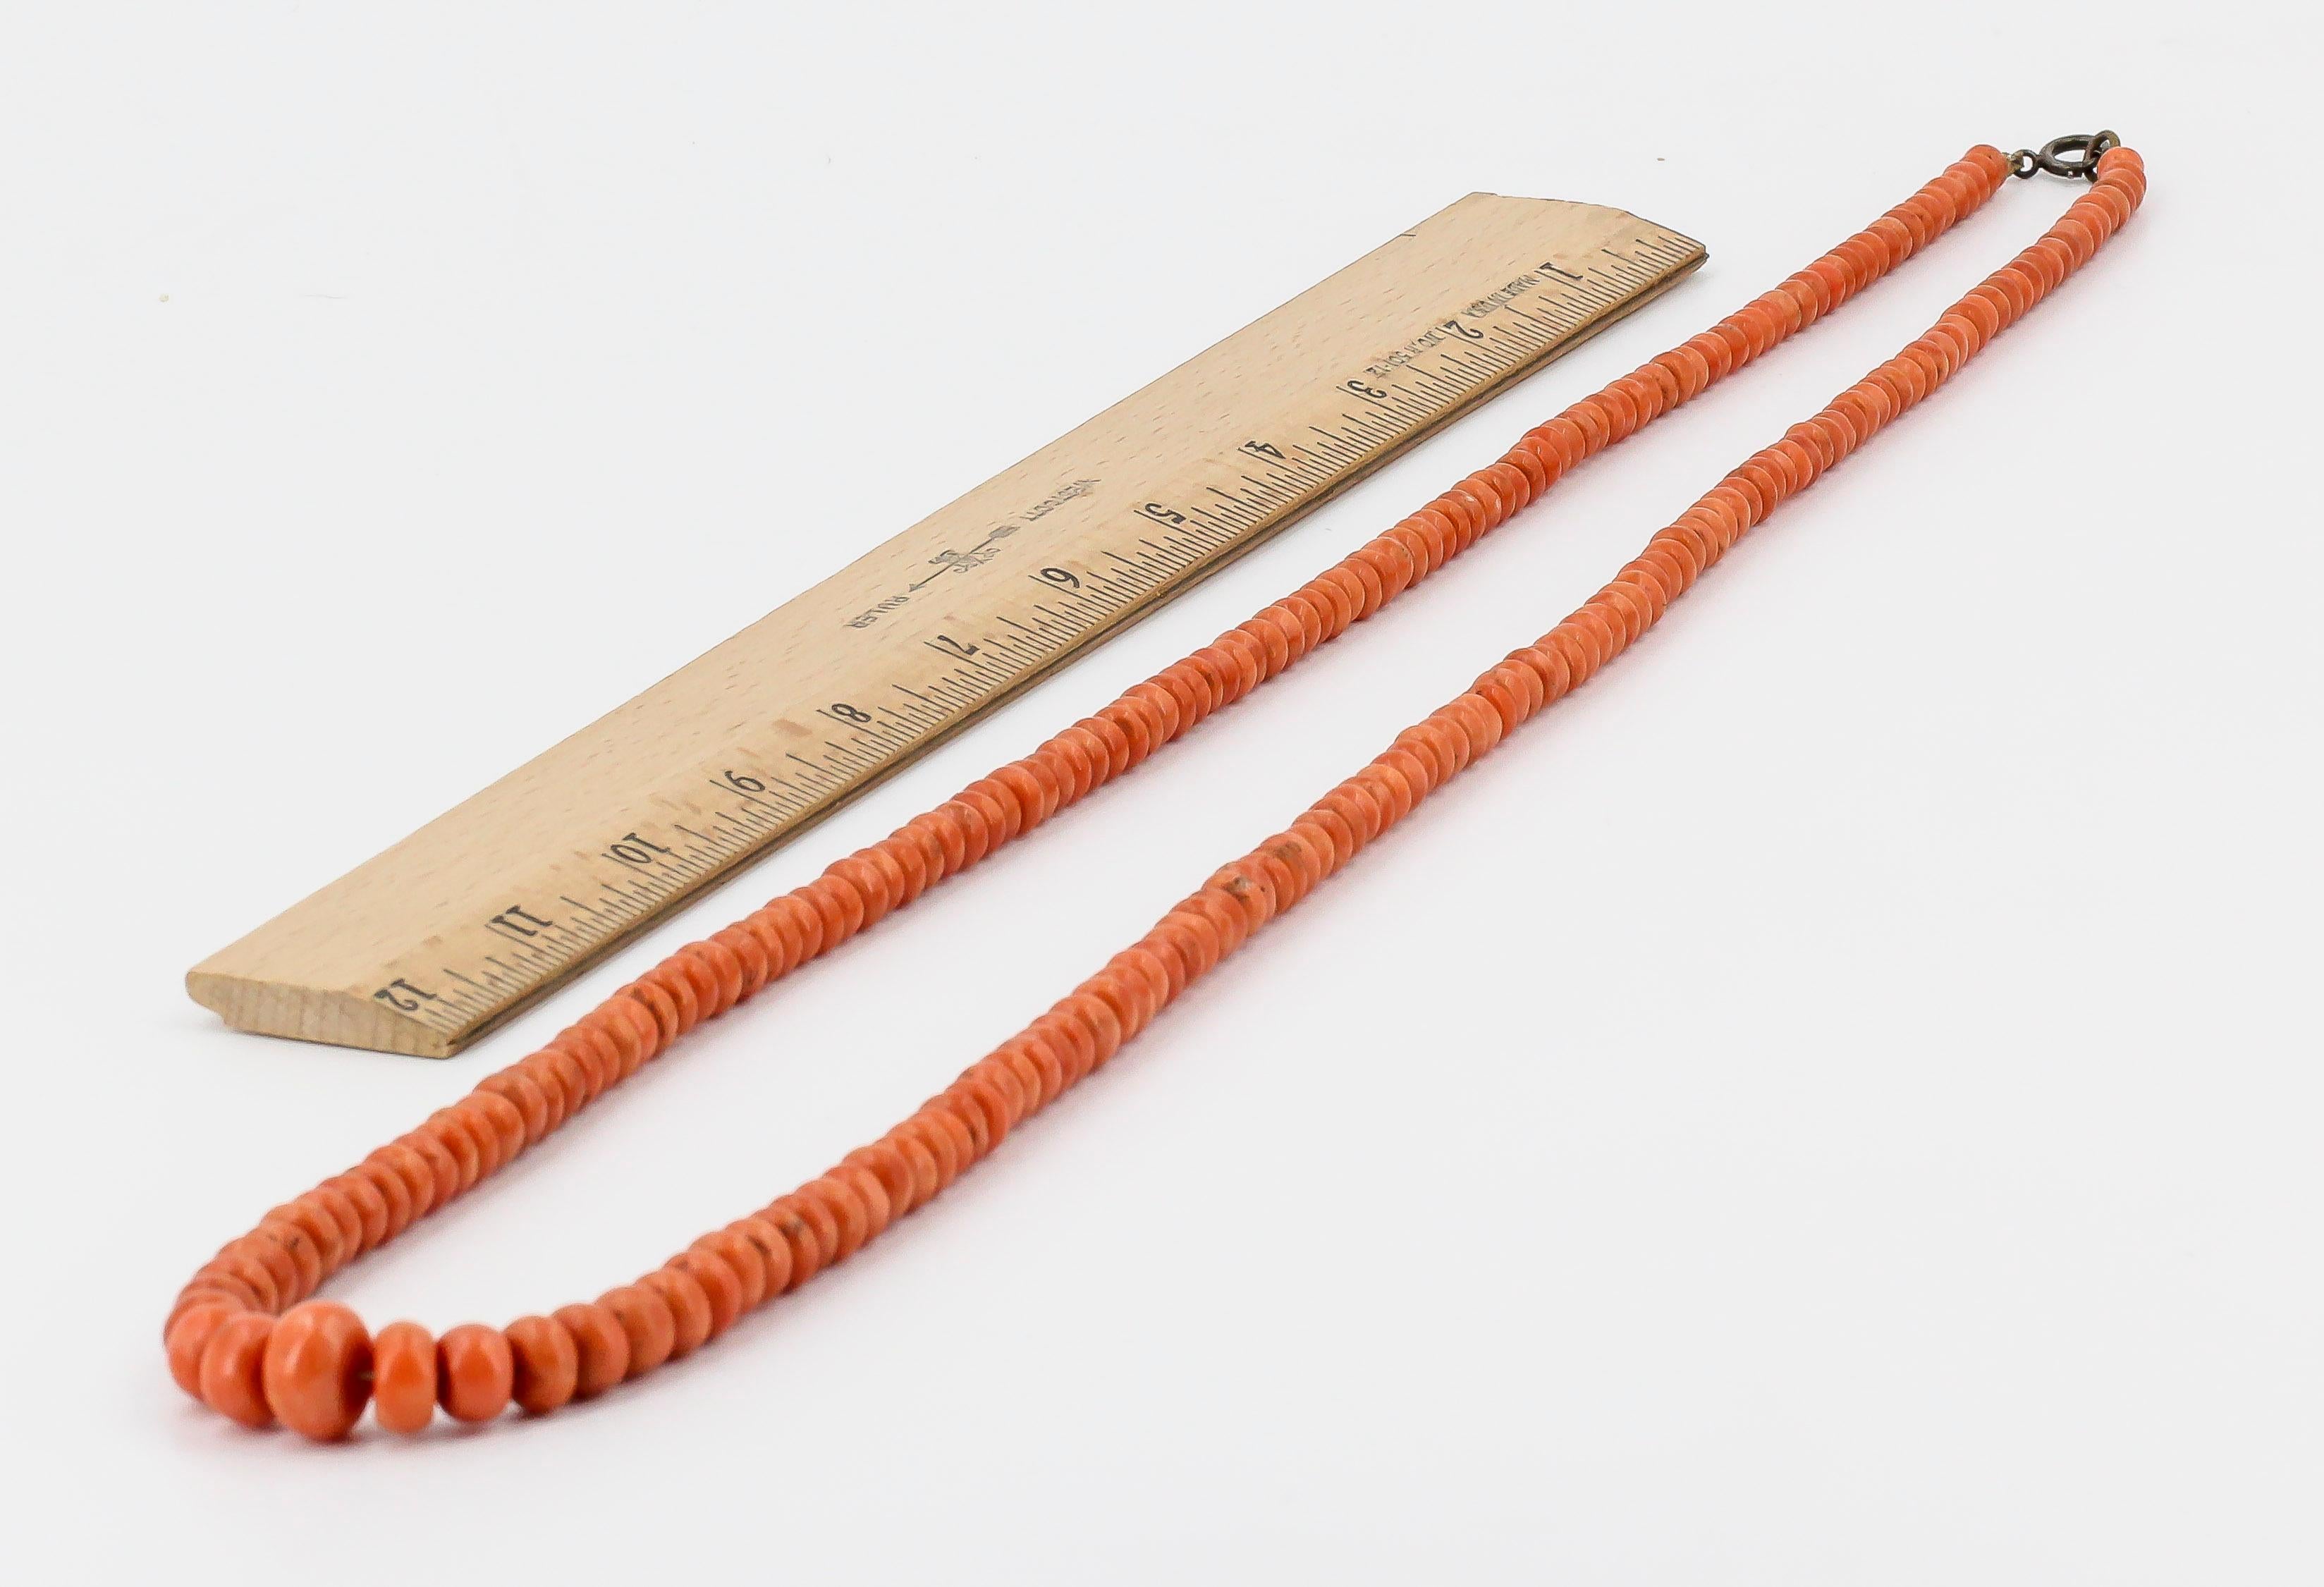 Stylish coral necklace of Oriental origin, circa 1930s-40s. It features beads ranging from 4mm to 12mm in diameter and its total length is 38